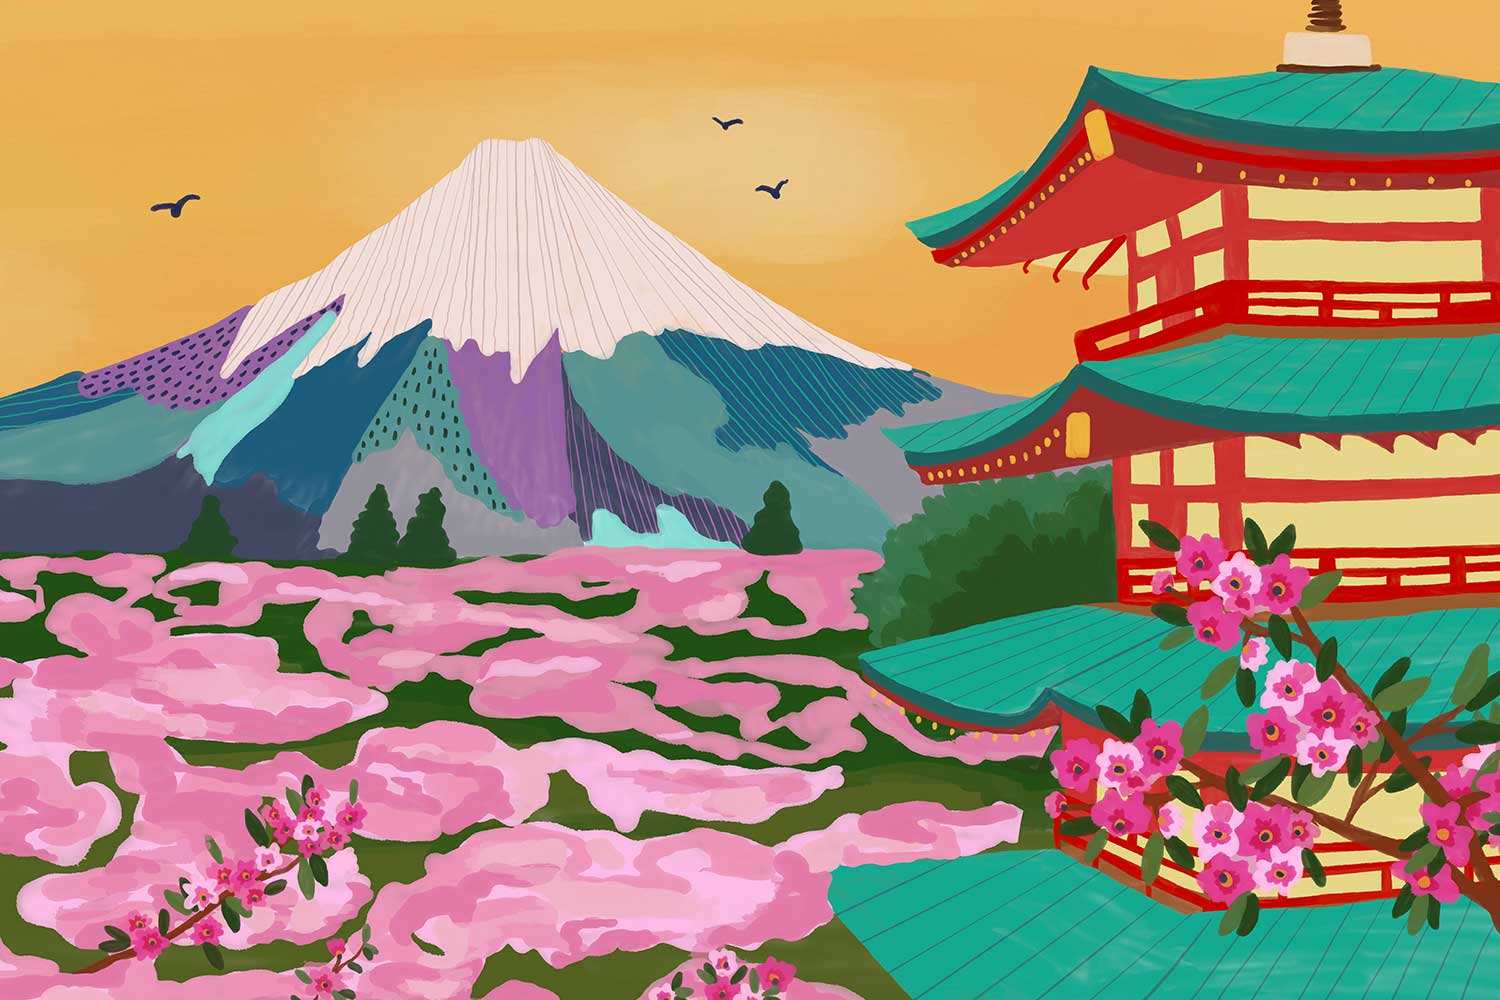 A bright, colourful illustration of Mt Fuji and pink cherry blossom